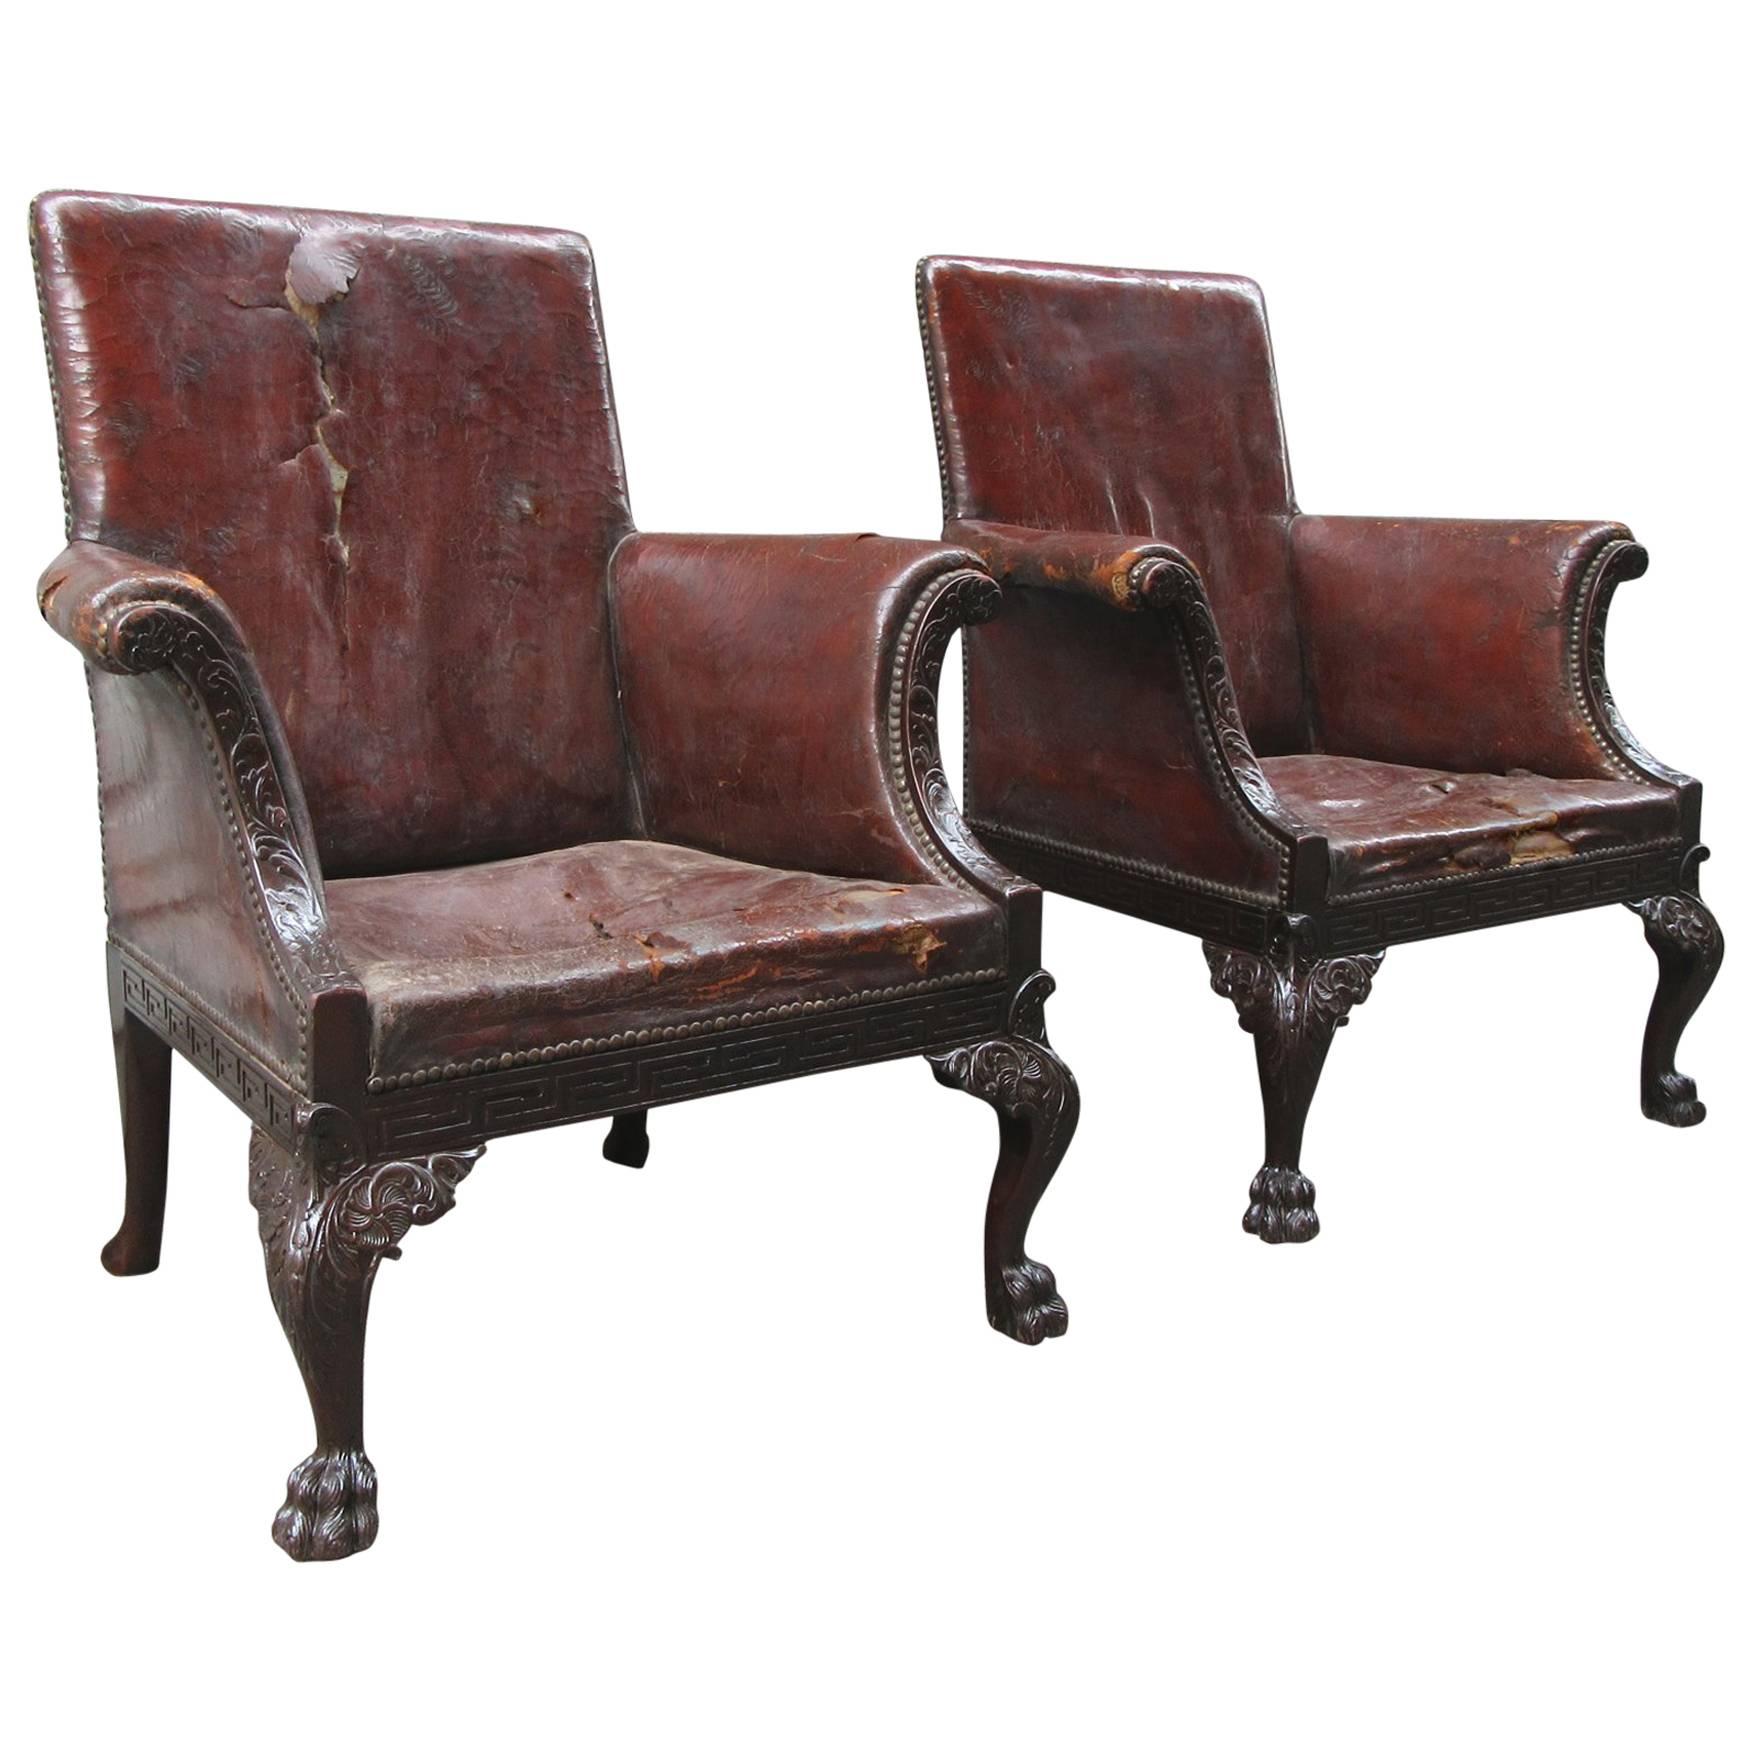 Large Pair of Early 19th Century Irish Chippendale Mahogany Library Chairs